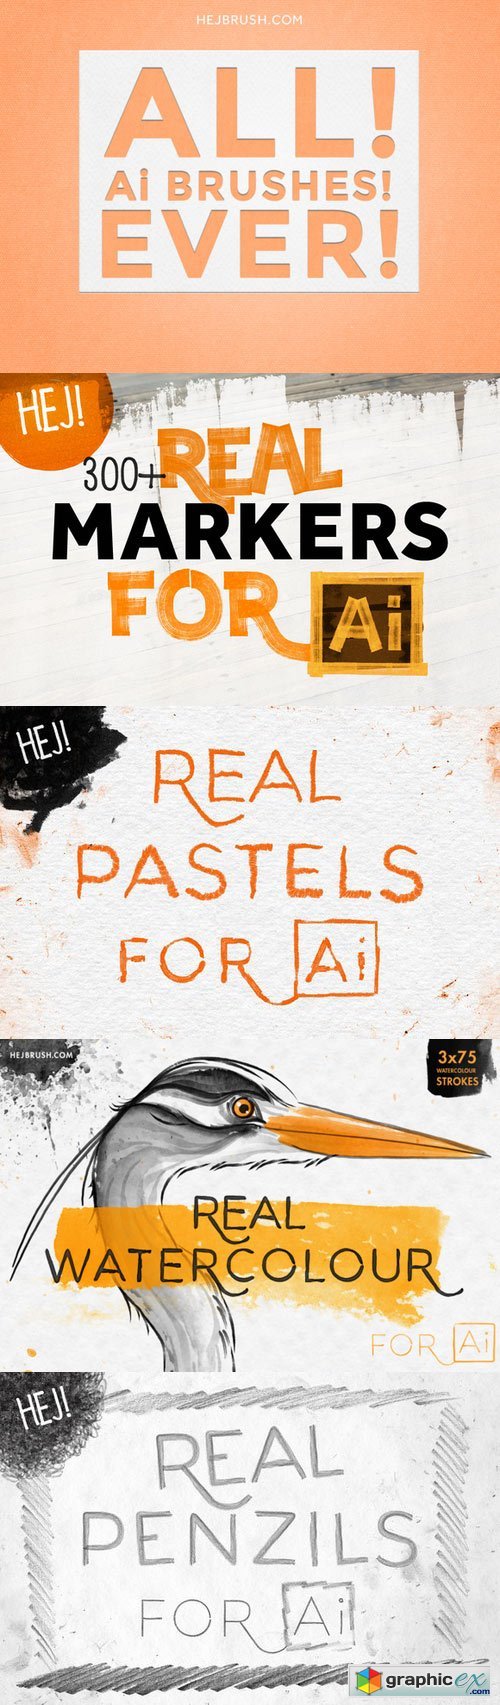 ALL! Ai BRUSHES! EVER! FOREVER!